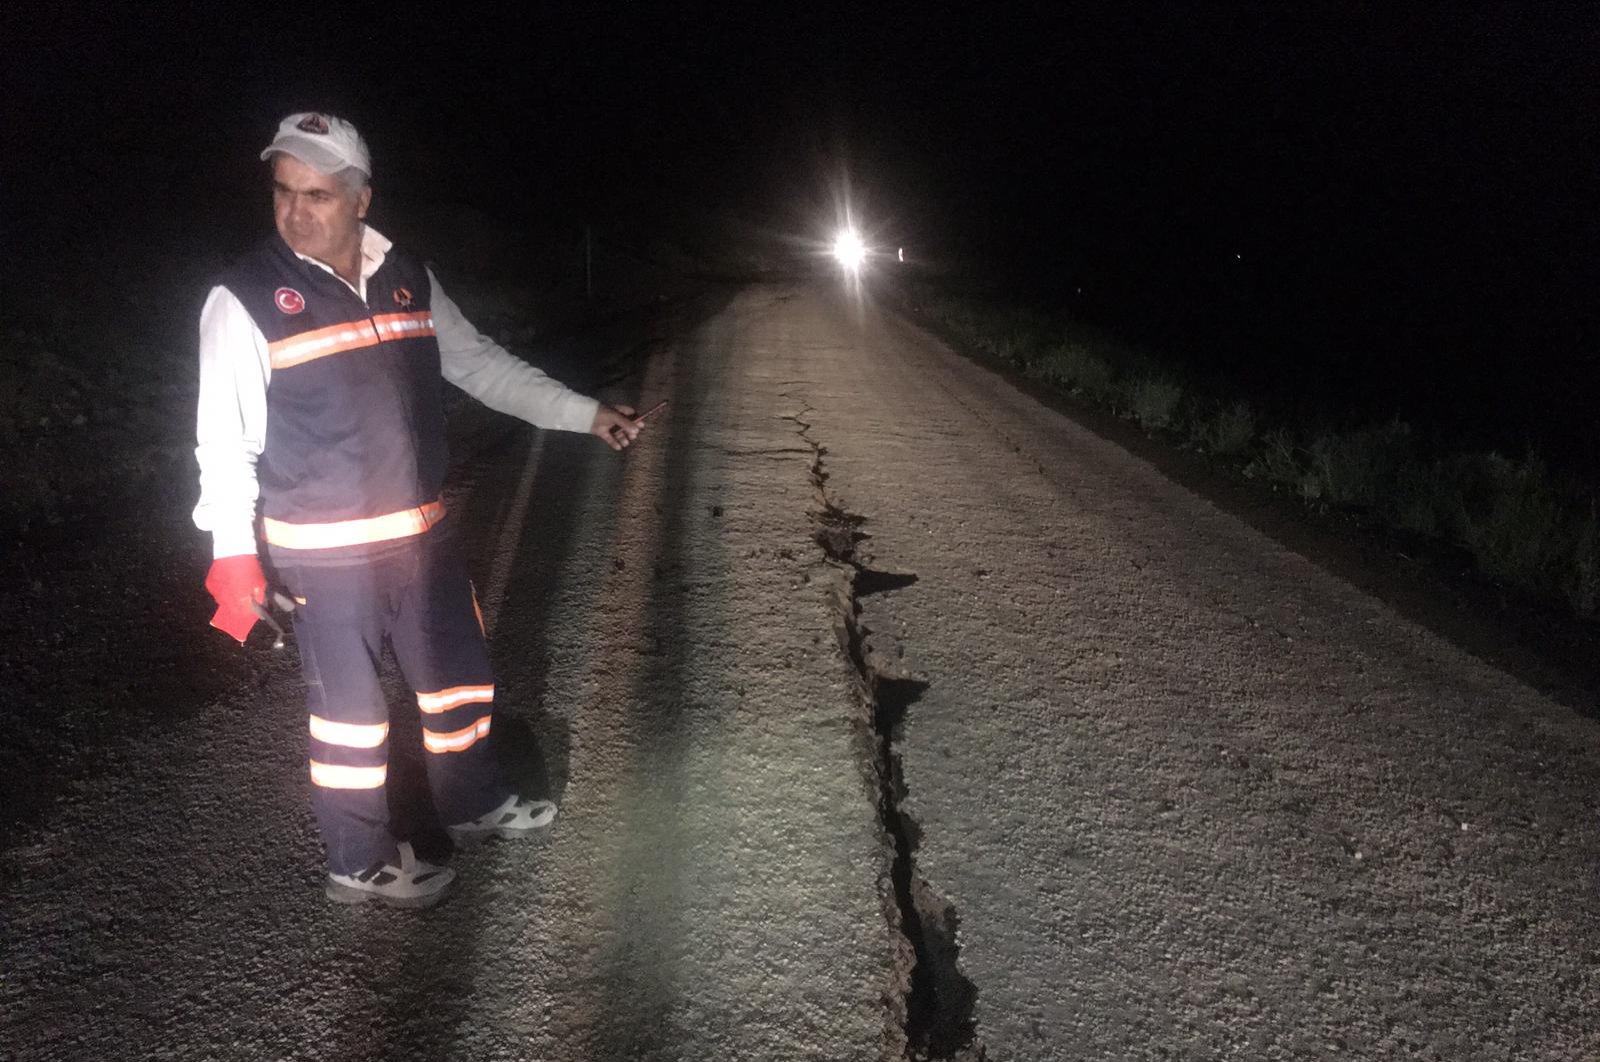 A Disaster and Emergency Management Authority (AFAD) employee stands by a crack that emerged in a road following a 5.7 magnitude earthquake, Bingöl, Turkey, June 14, 2020. (AA Photo)